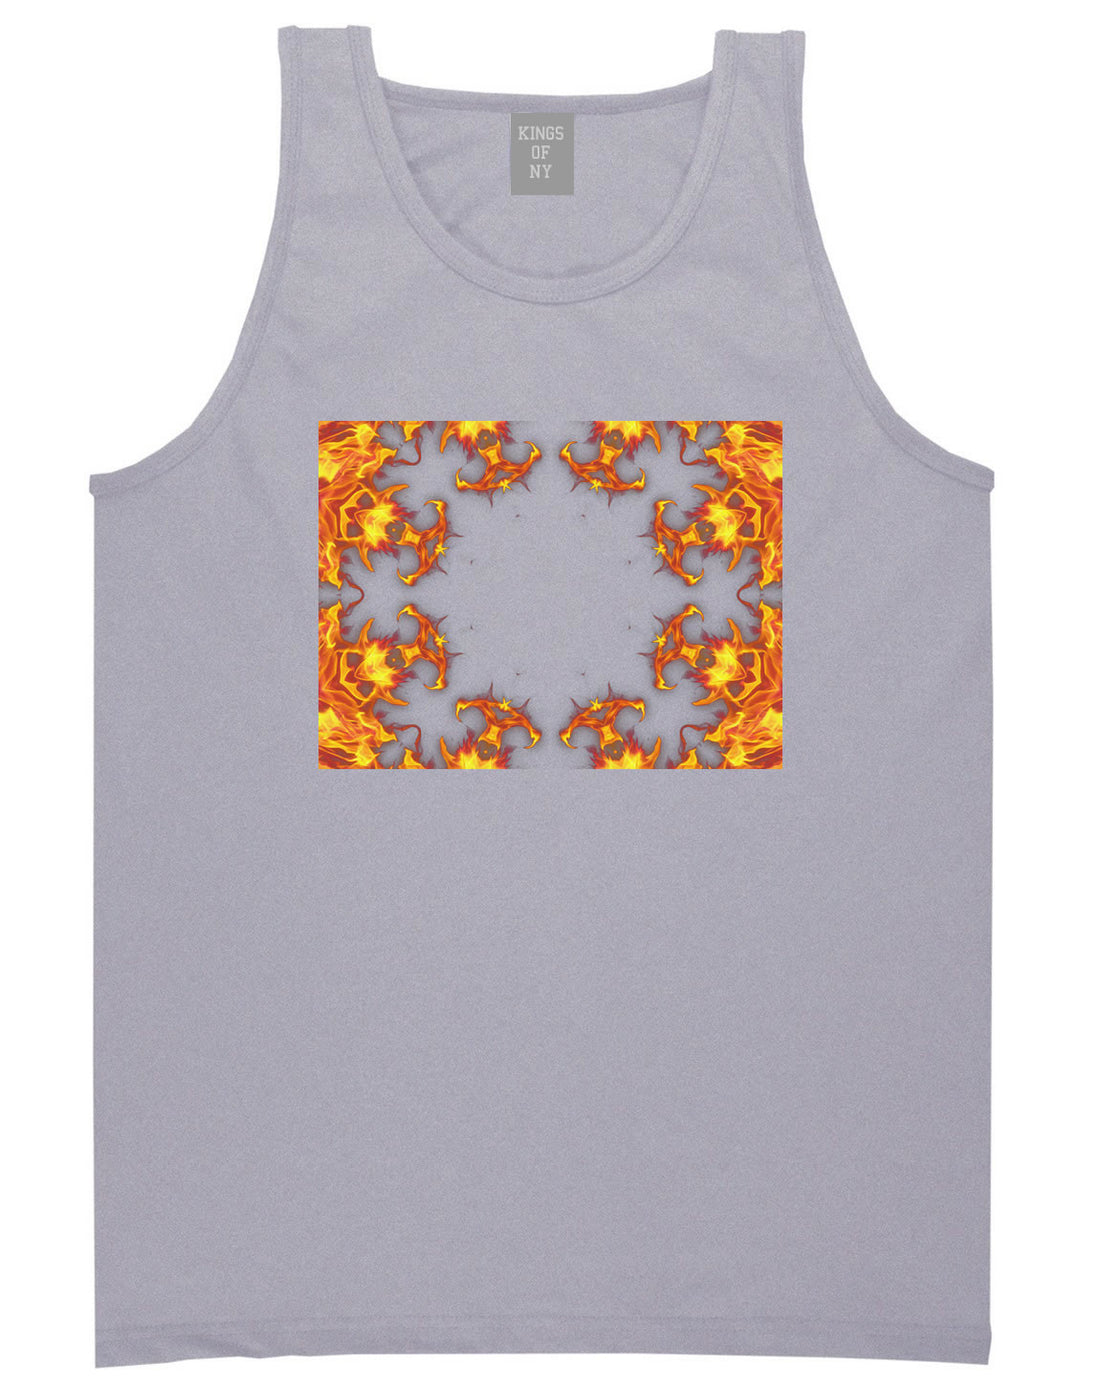 Flames of Fire Gold Frame Tank Top in Grey By Kings Of NY